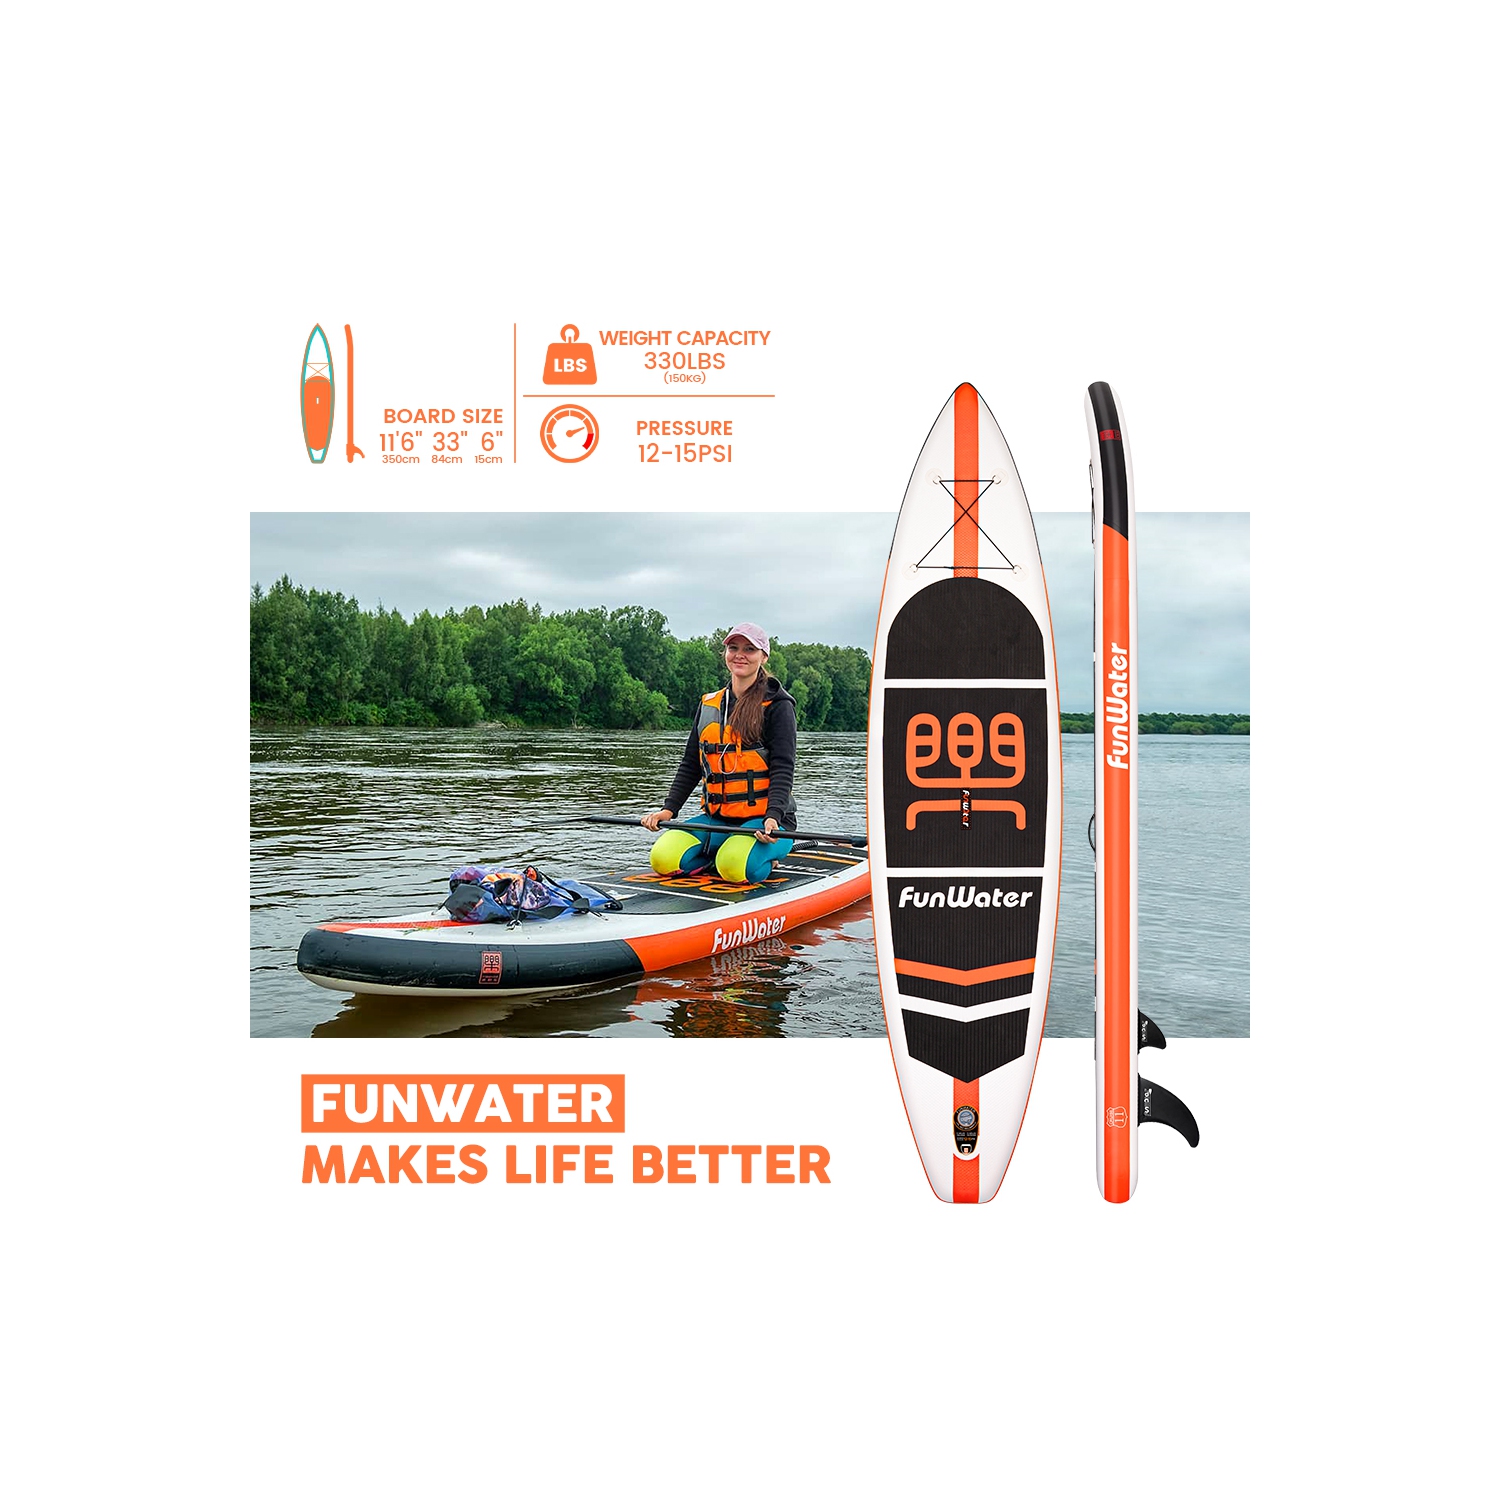  AQUAGLIDE Inflatable Stand Up Paddle Board with Premium SUP  Accessories - Backpack, 3-Piece Wayfinder Leverlock Paddle, Fin, Leash, and  Hand Pump - Cascade 11' ISUP, Multicolor, 40.15748031496063 : Sports &  Outdoors